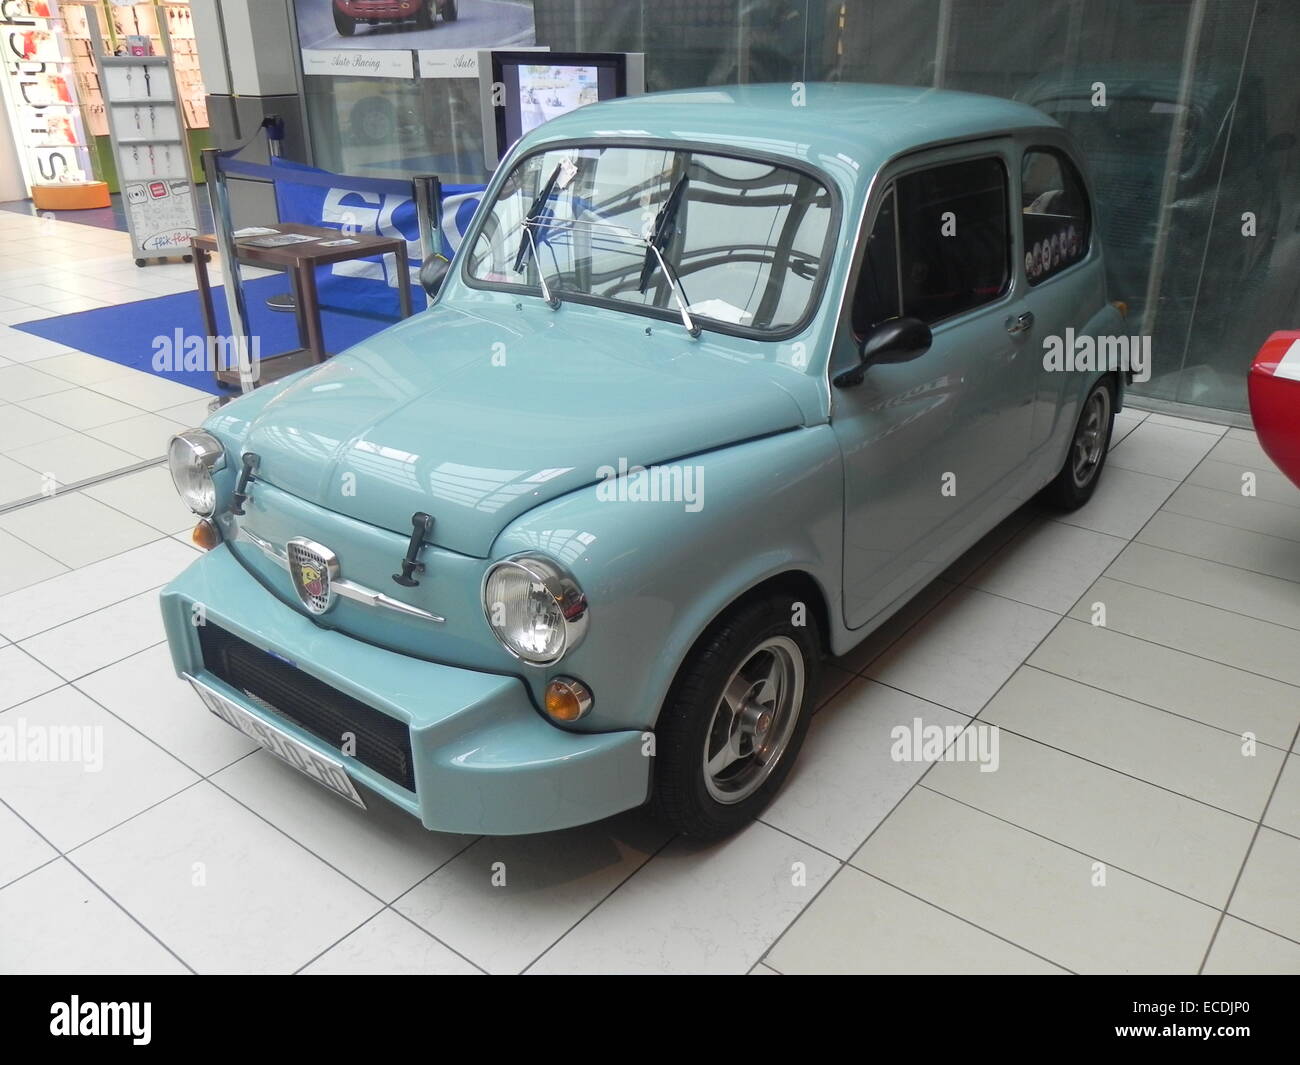 he Fiat 600 Abarth 850 TC, a nice vintage car produced in Italy in 1965 by Fiat with the engine and the car body develobed by Ab Stock Photo